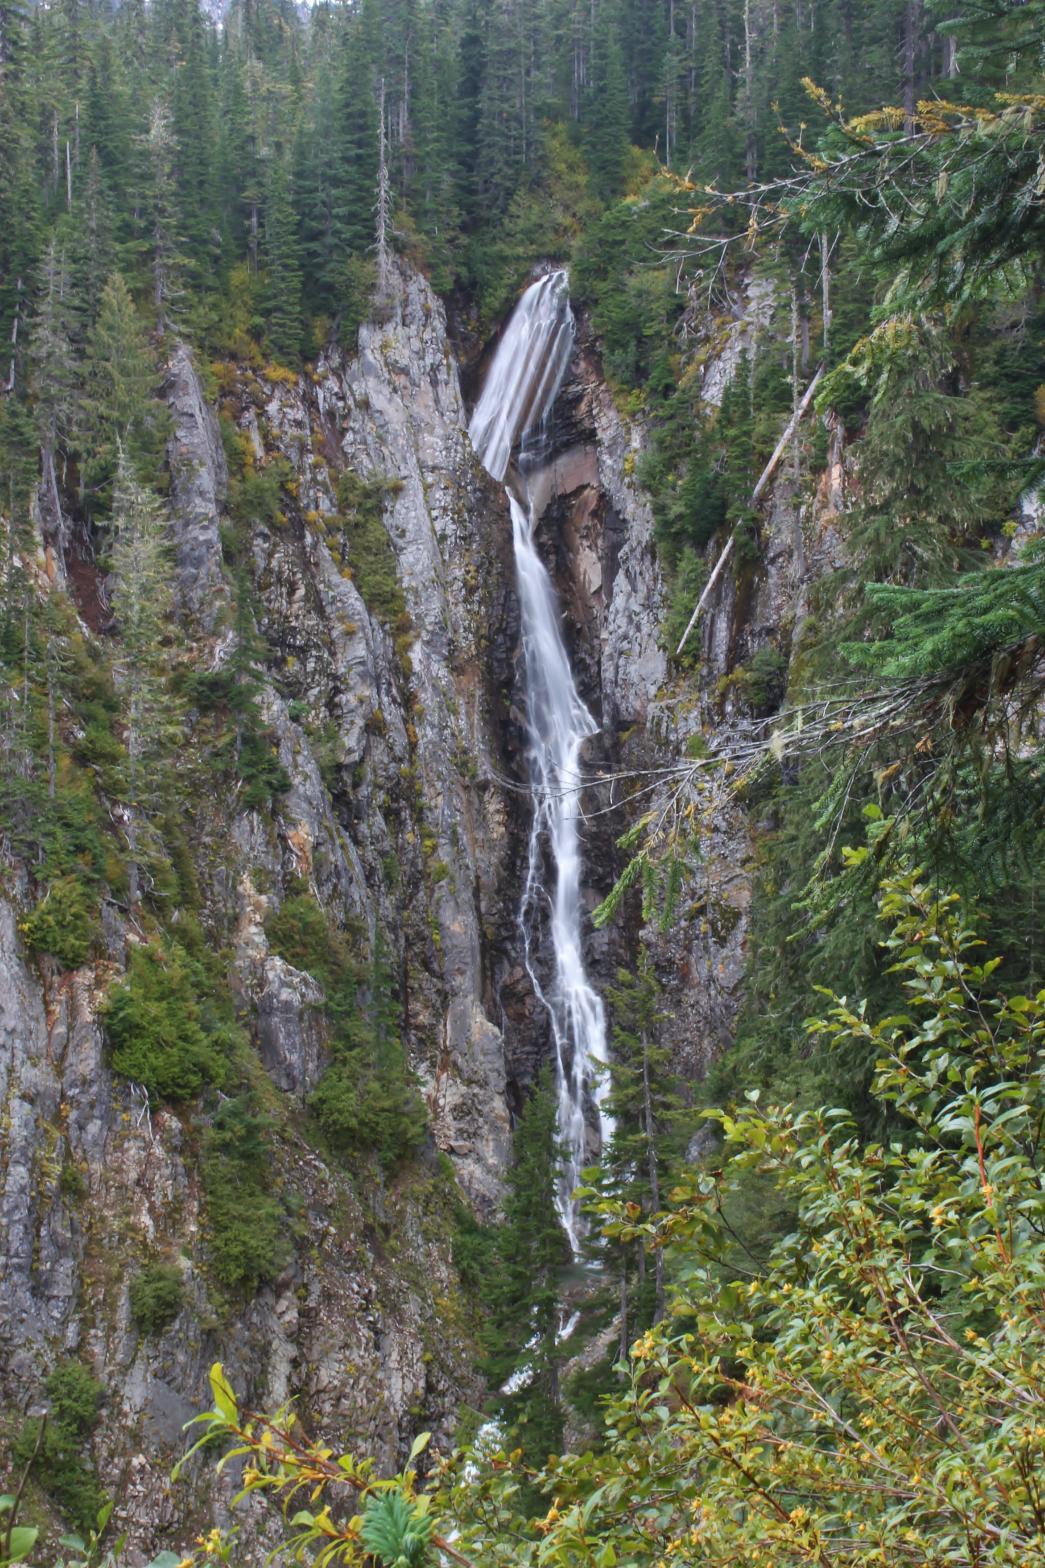 Popahomy Falls from atop the canyon wall